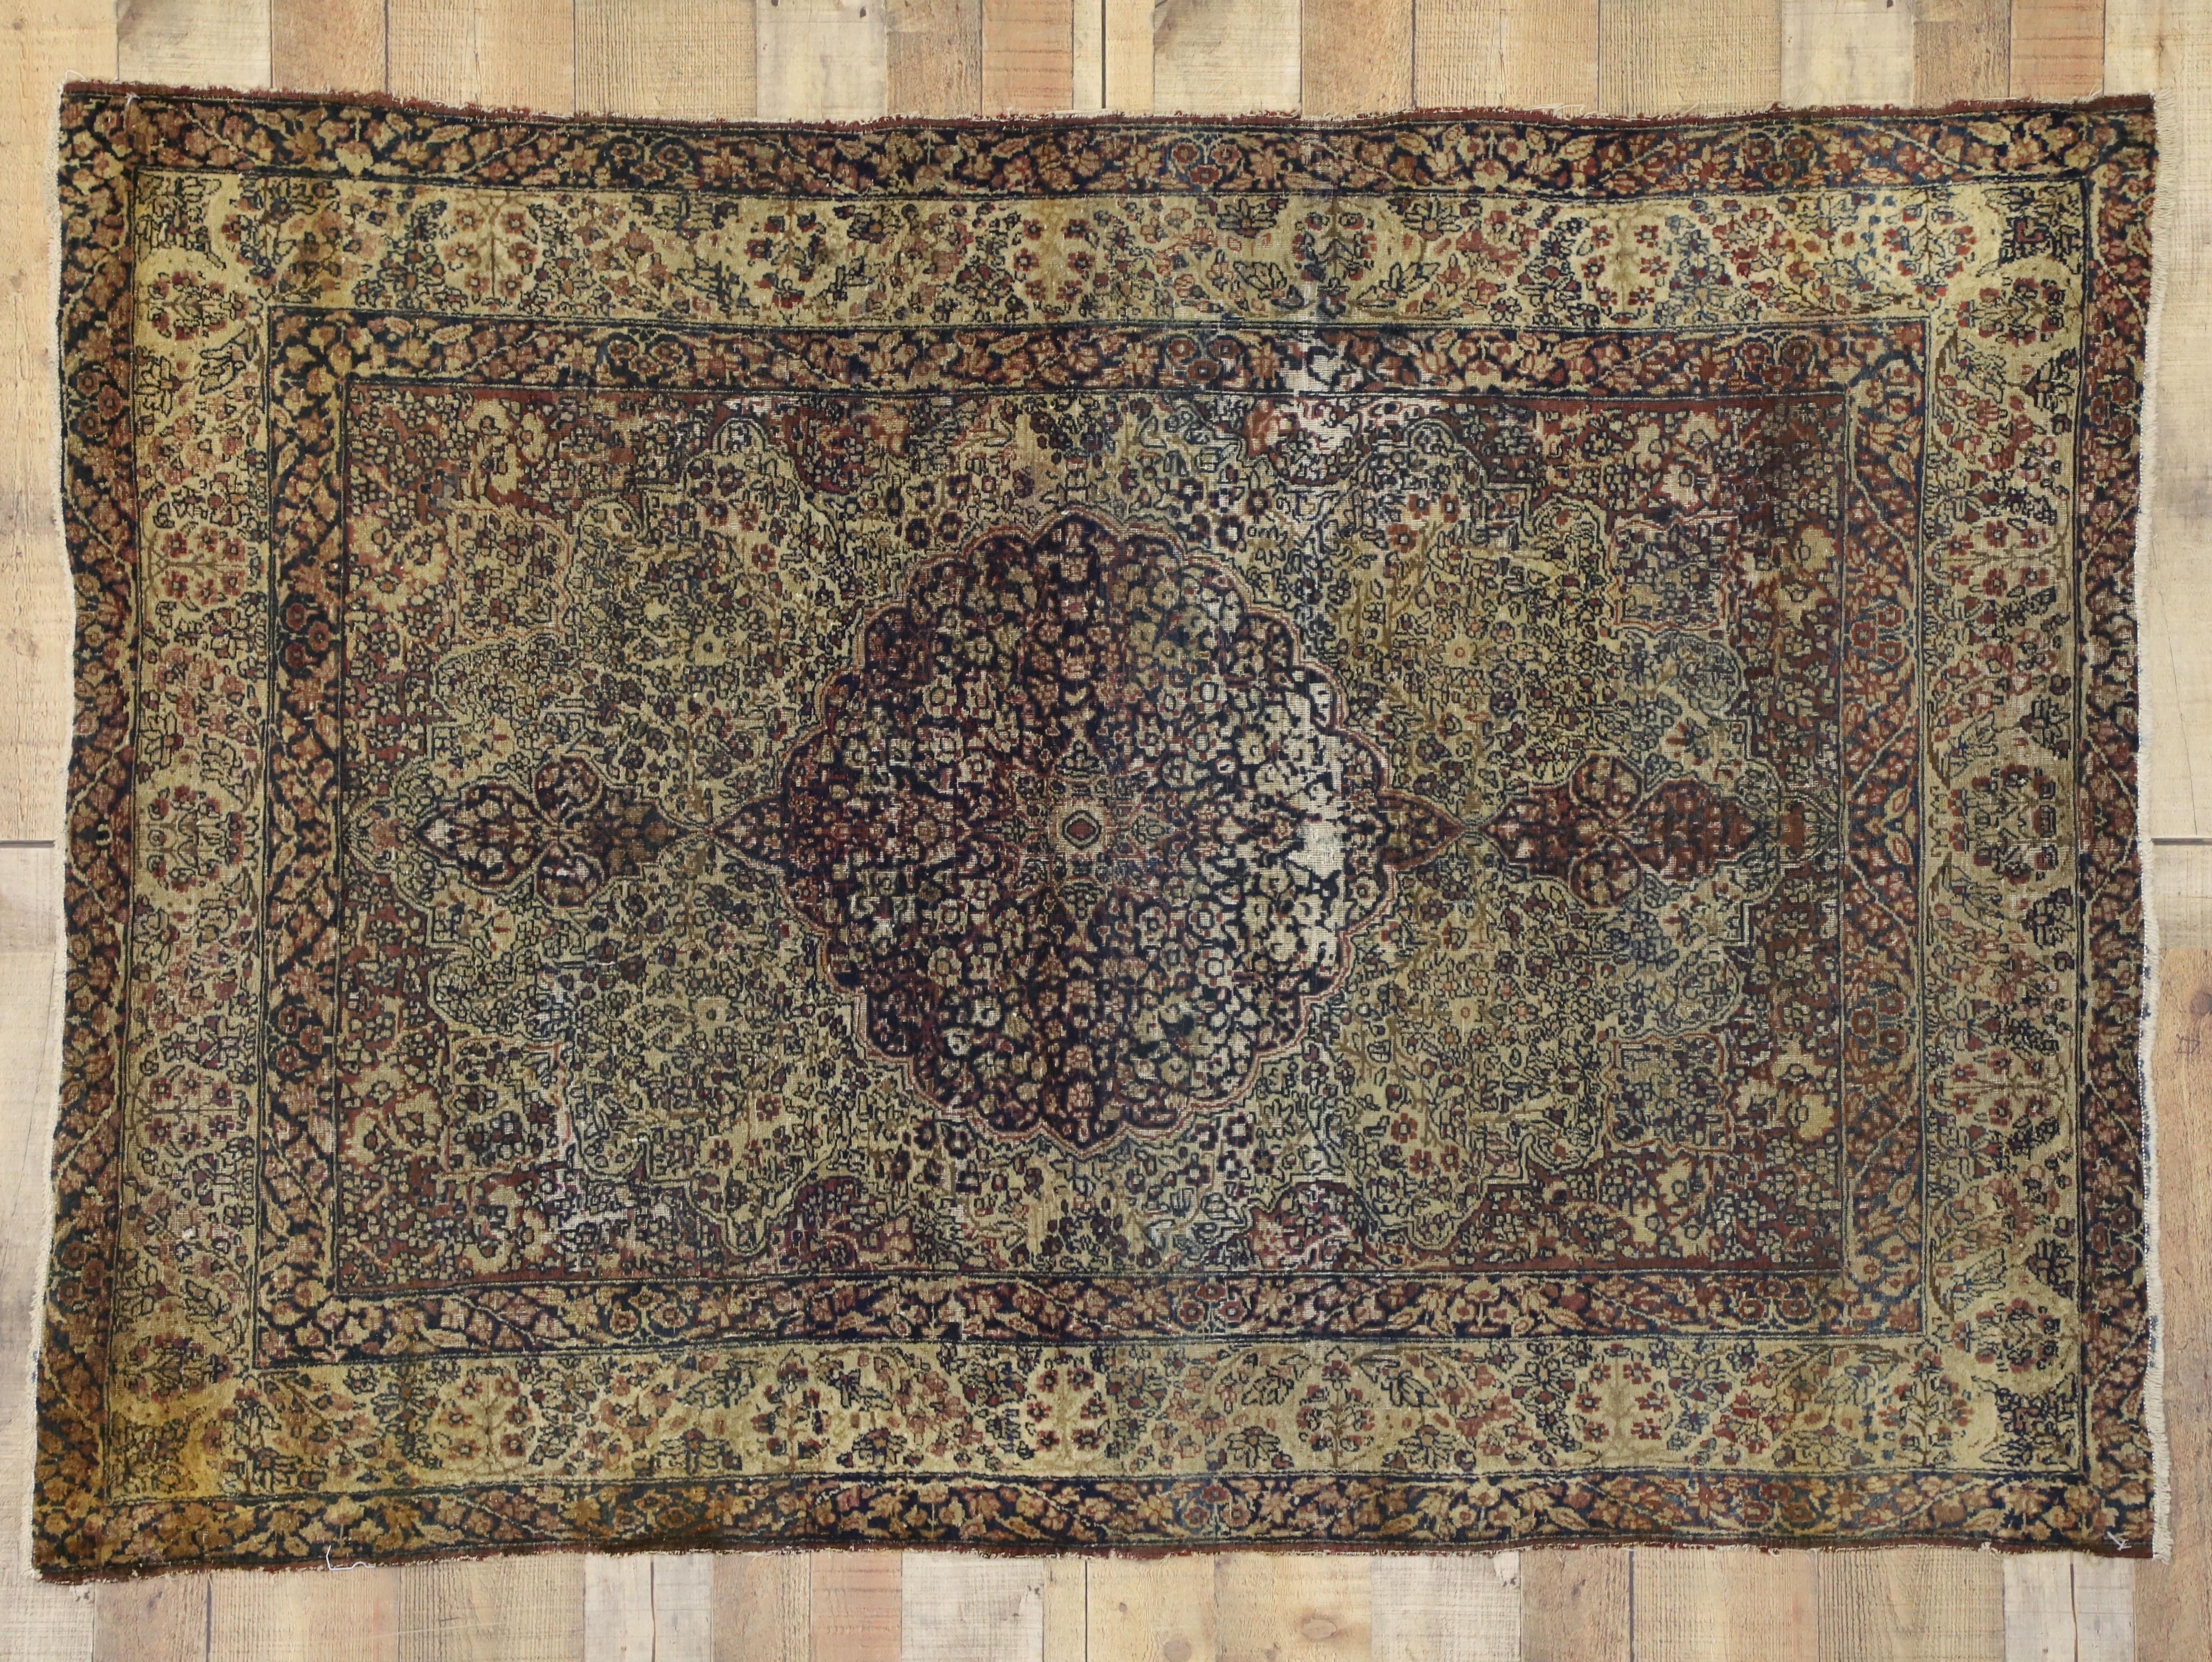 Distressed Antique Kermanshah Persian Rug with Rustic English Style For Sale 2